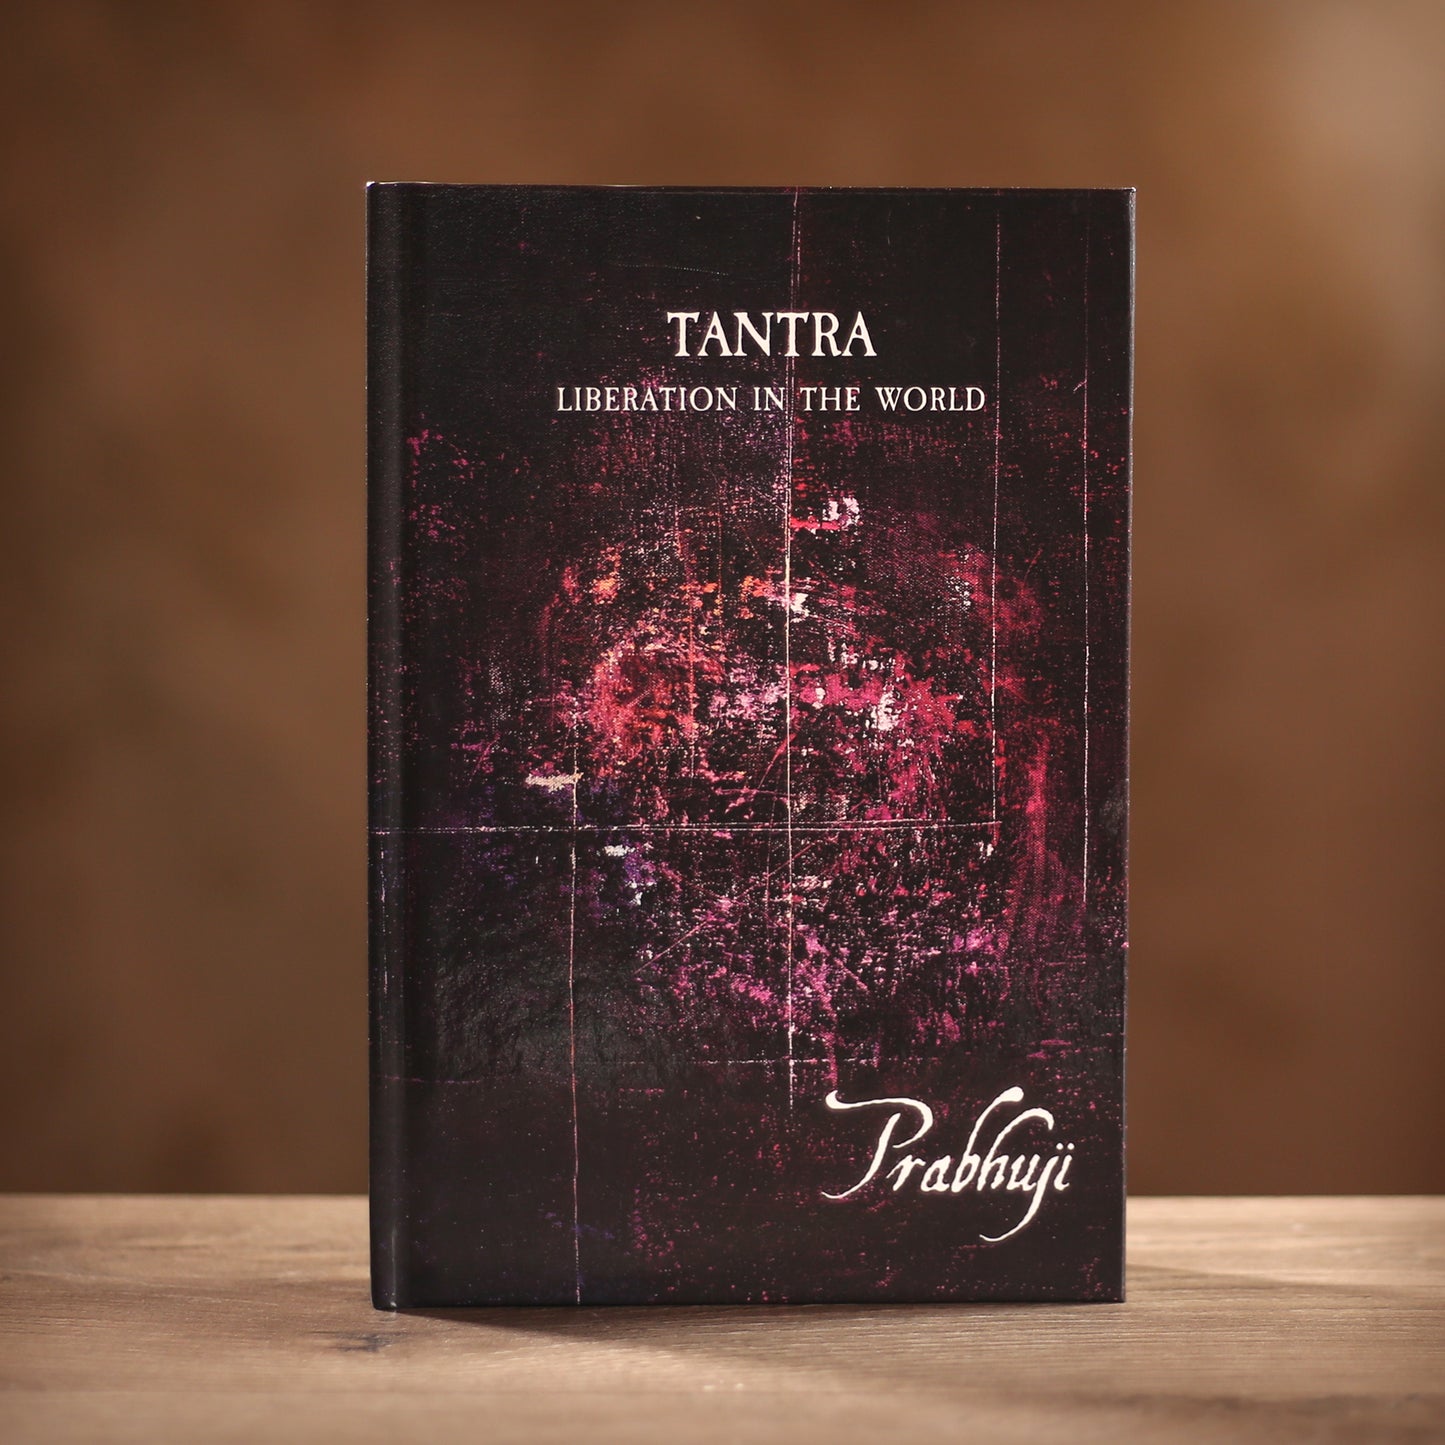 Book Tantra - Liberation in the world by Prabhuji (Hard cover - English)